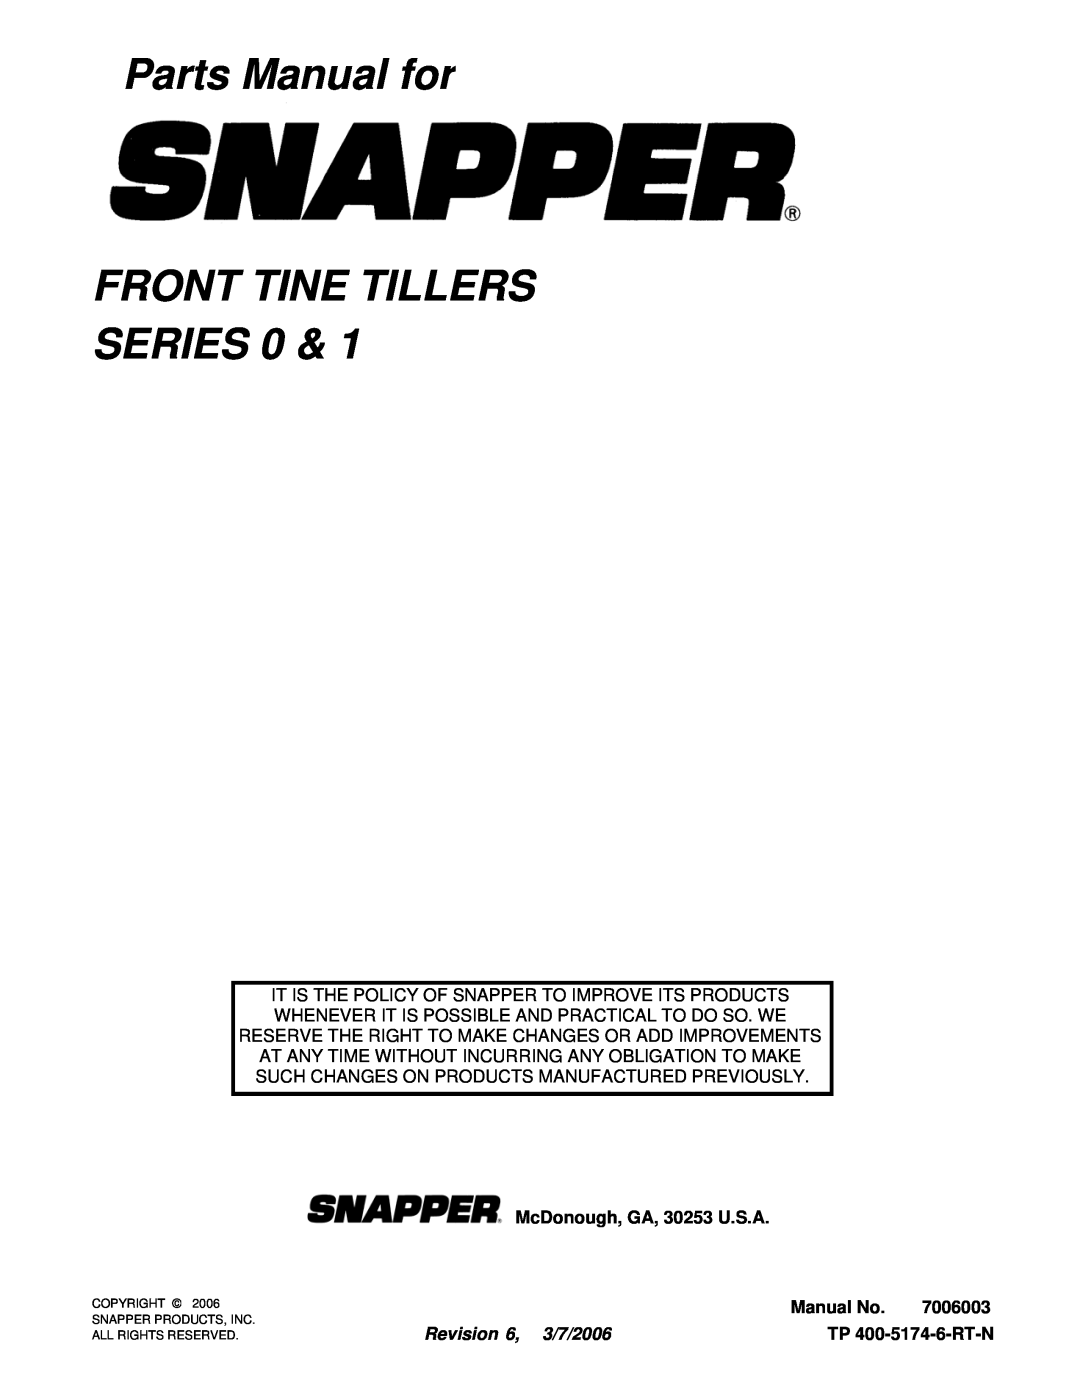 Snapper 401TCR Parts Manual for FRONT TINE TILLERS SERIES 0, TP 400-5174-6-RT-N, McDonough, GA, 30253 U.S.A, Manual No 